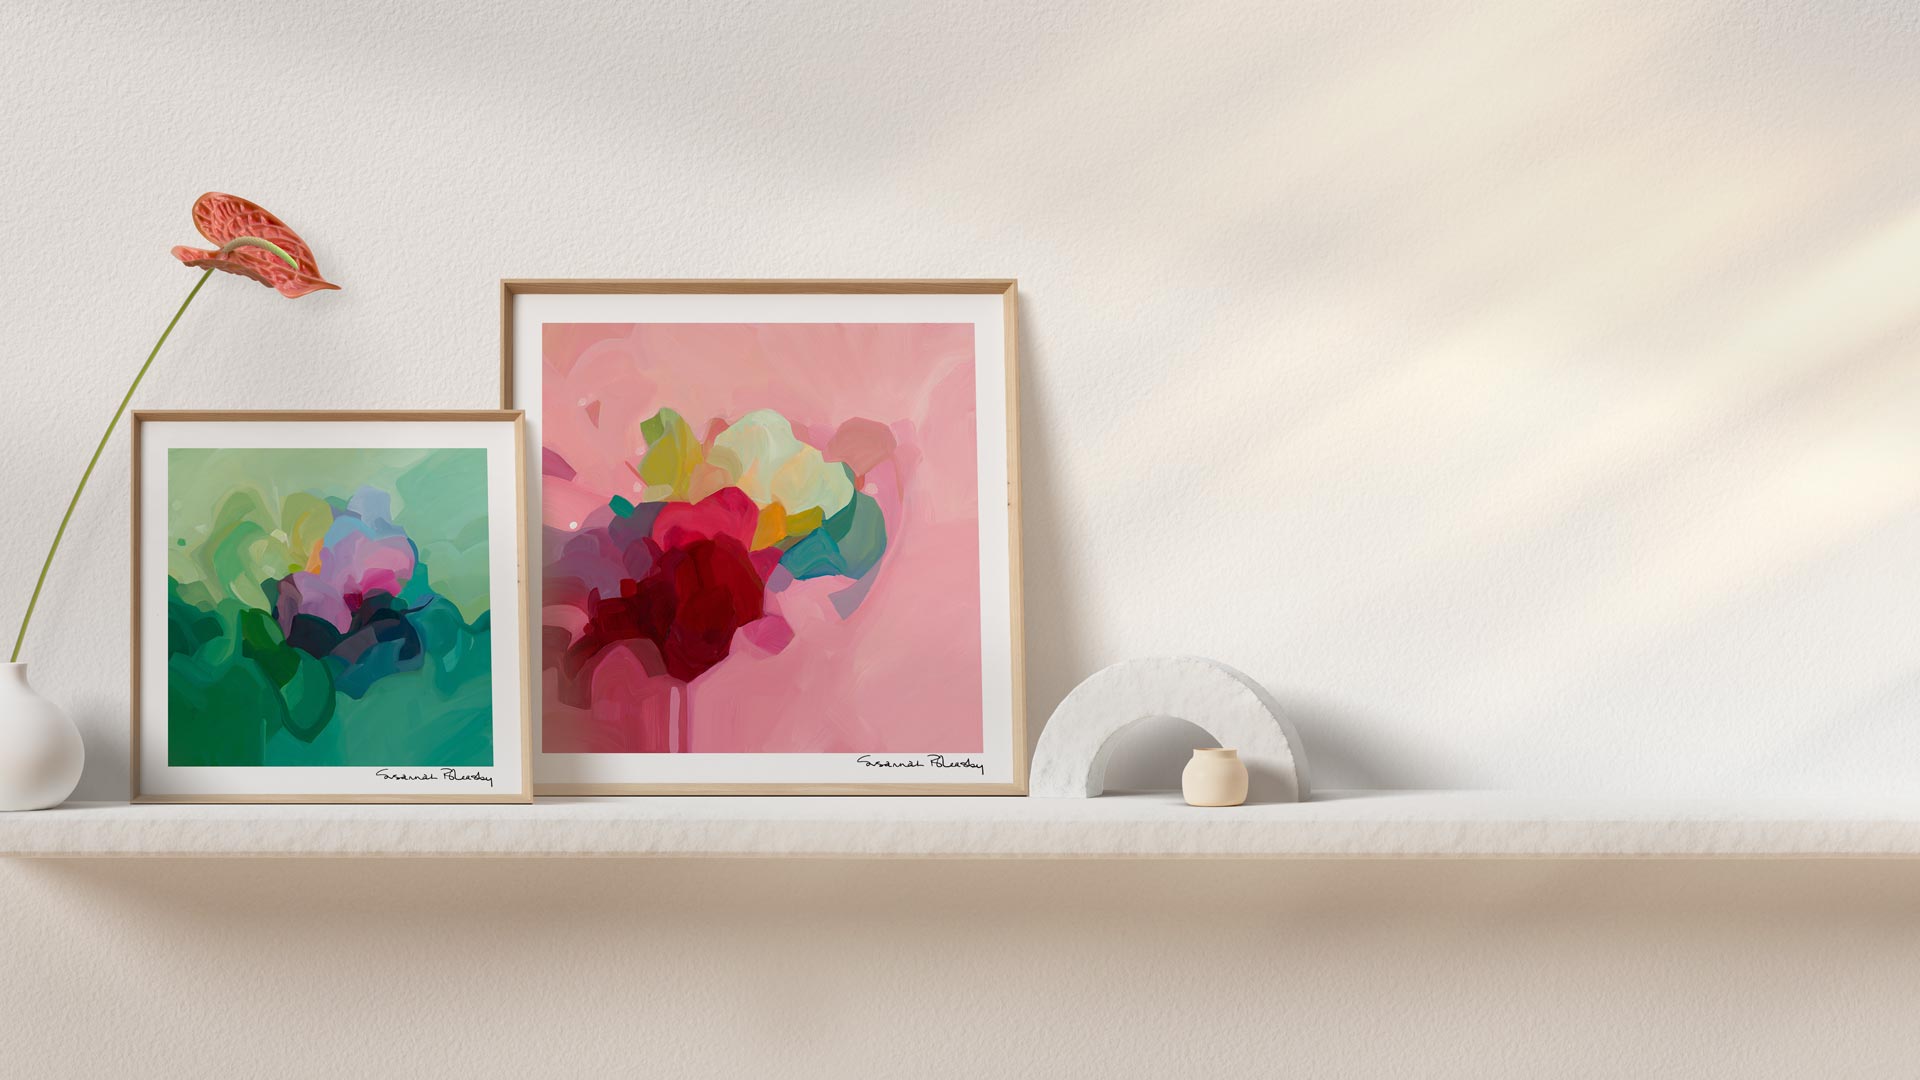 Colourful abstract fine art prints in jade green and dustry rose